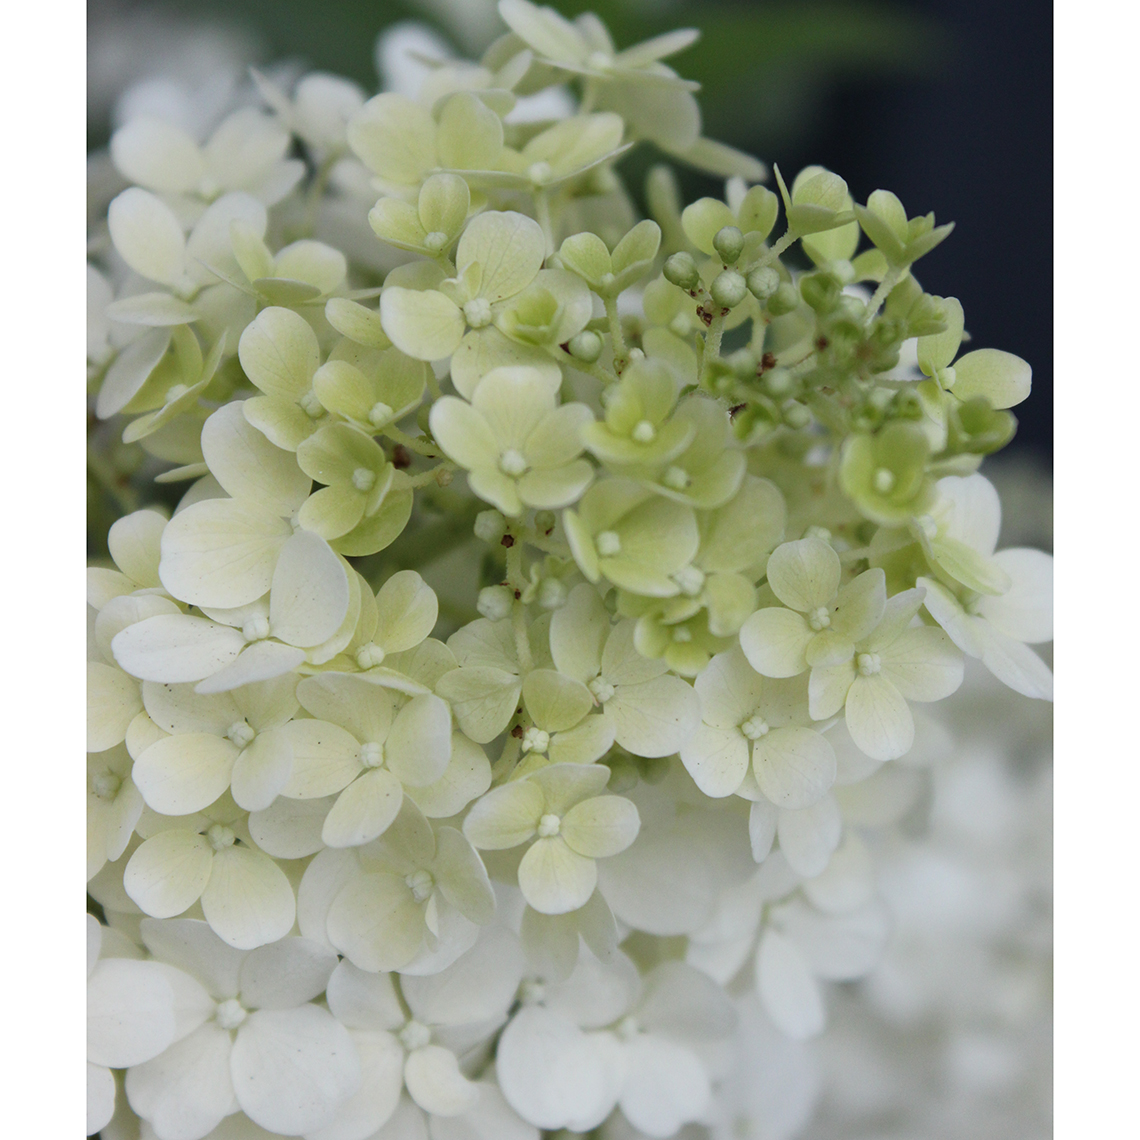 Closeup of the mophead bloom of Bobo panicle hydrangea in its white phase